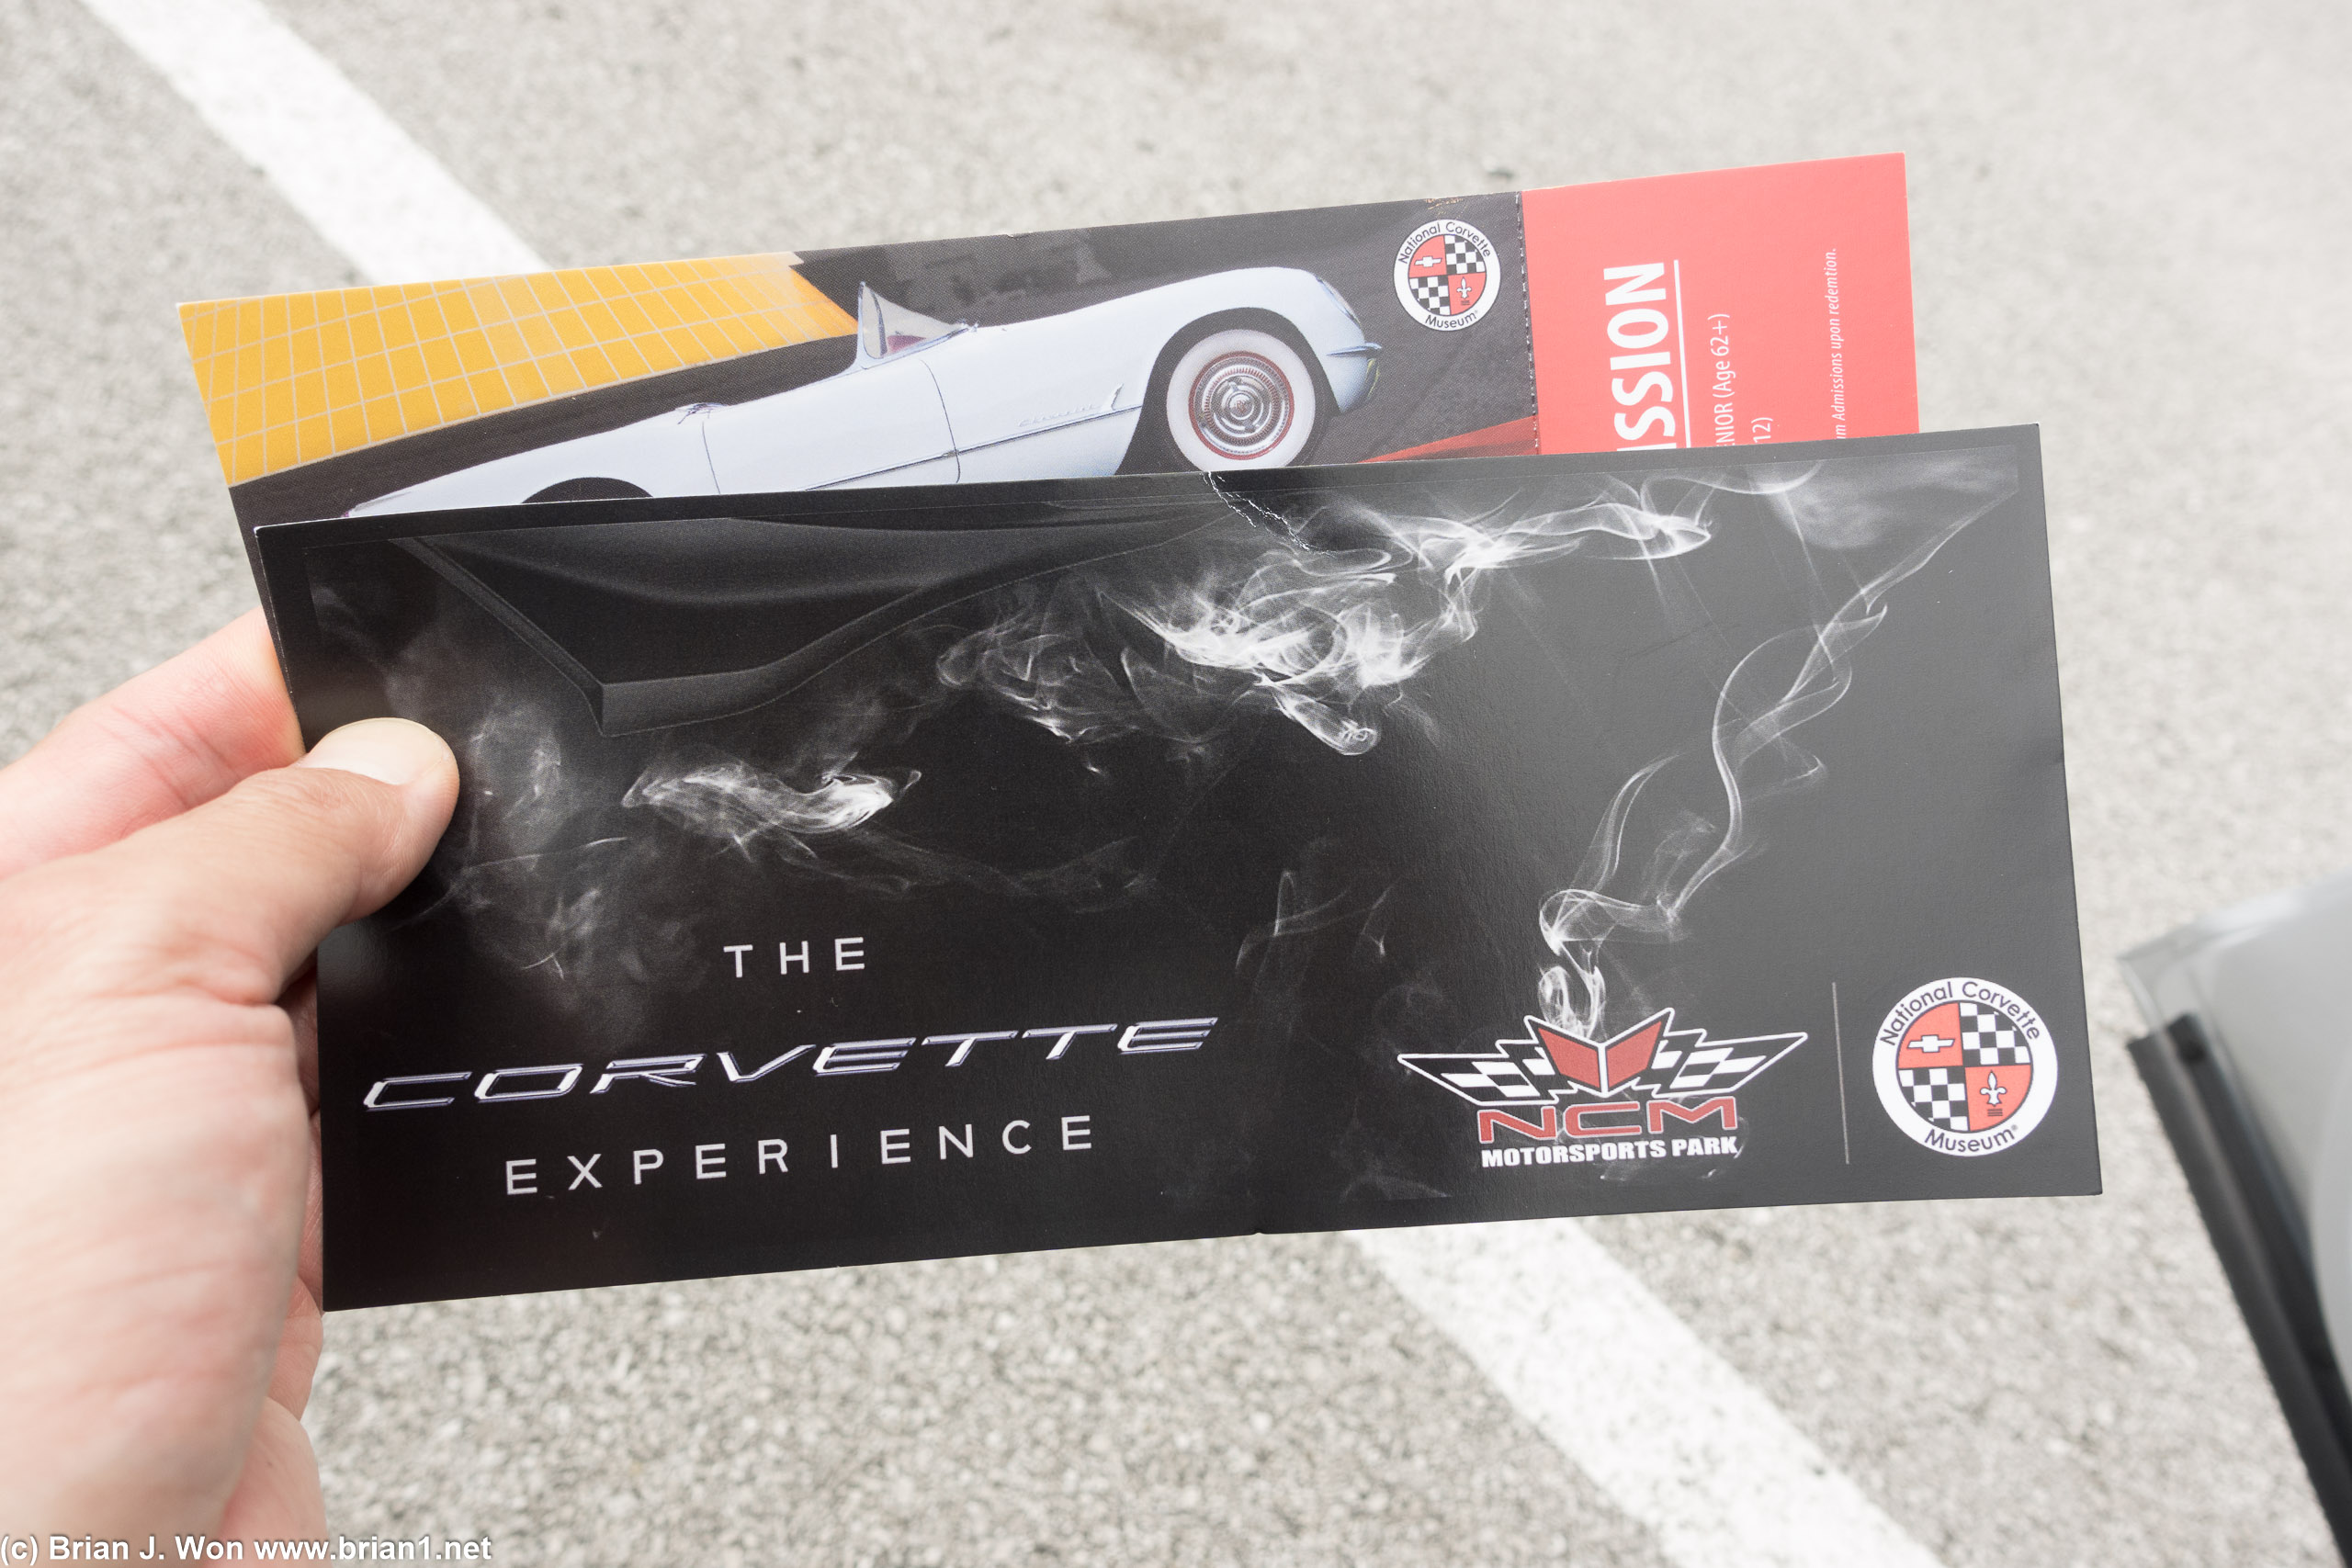 The Corvette Experience comes with museum admission.